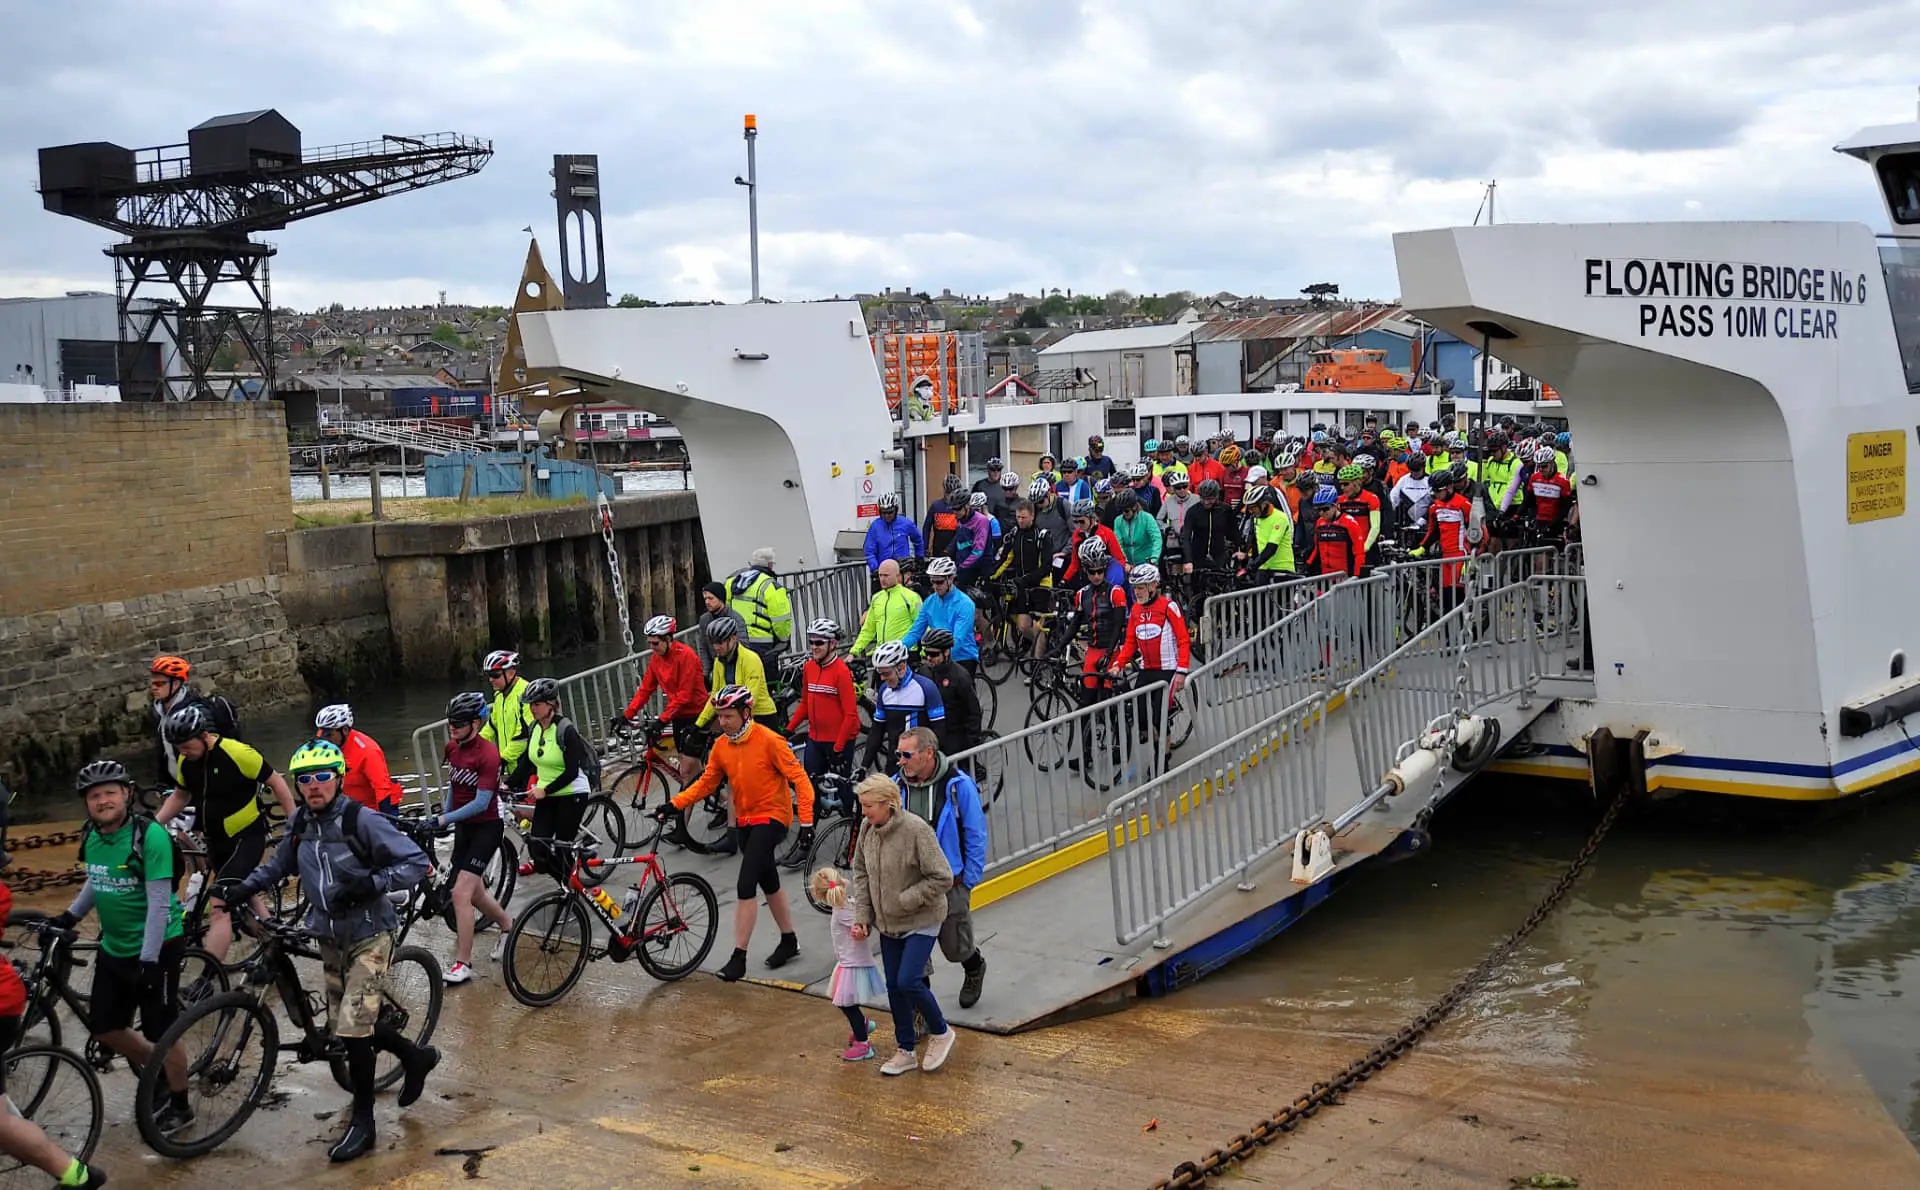 Cyclists alighting from floating bridge -